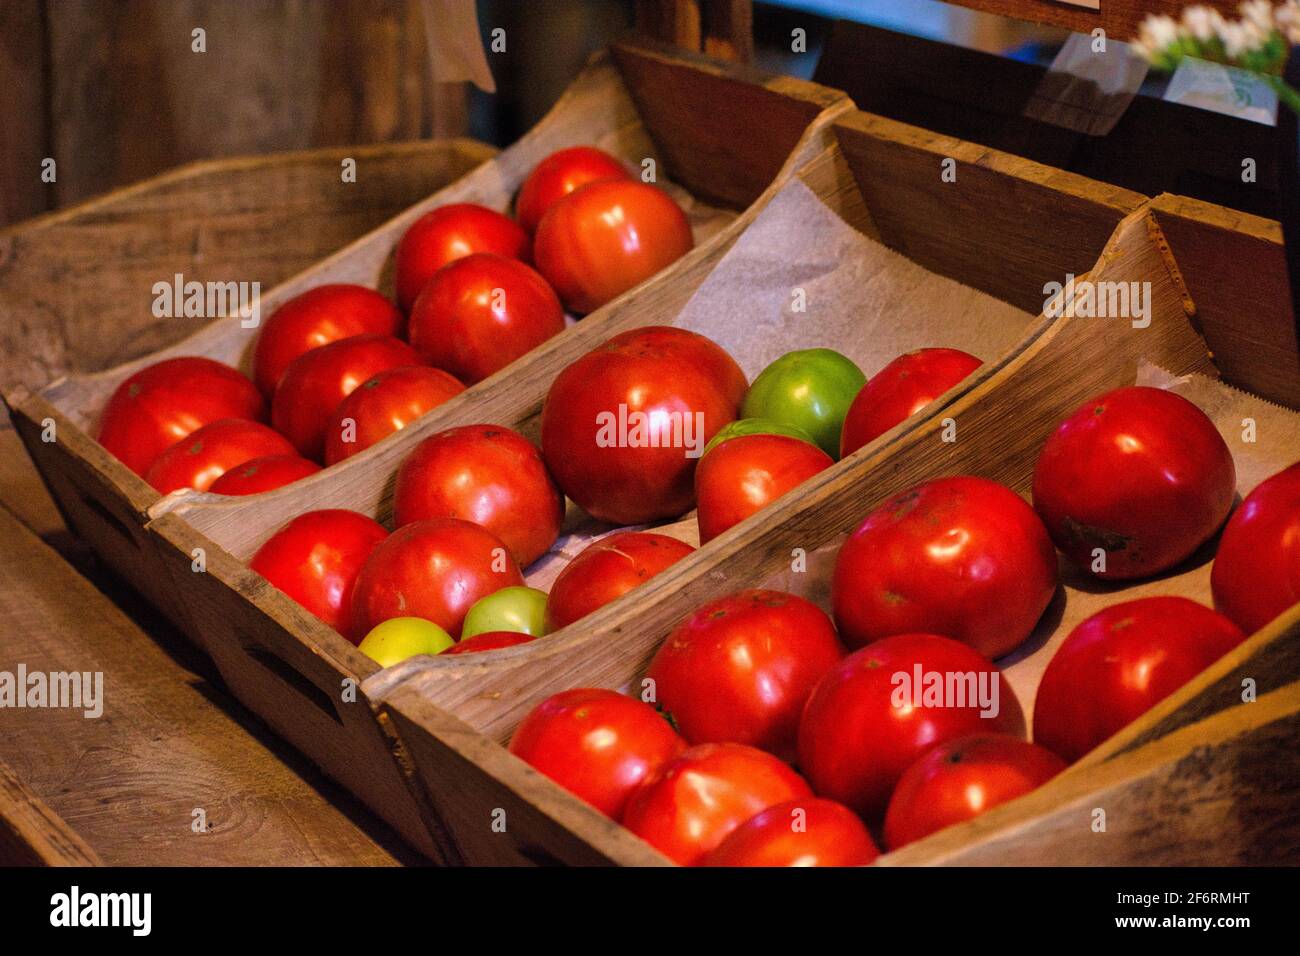 Fresh garden tomatoes in wood crates for sale at a farmer's market Stock Photo